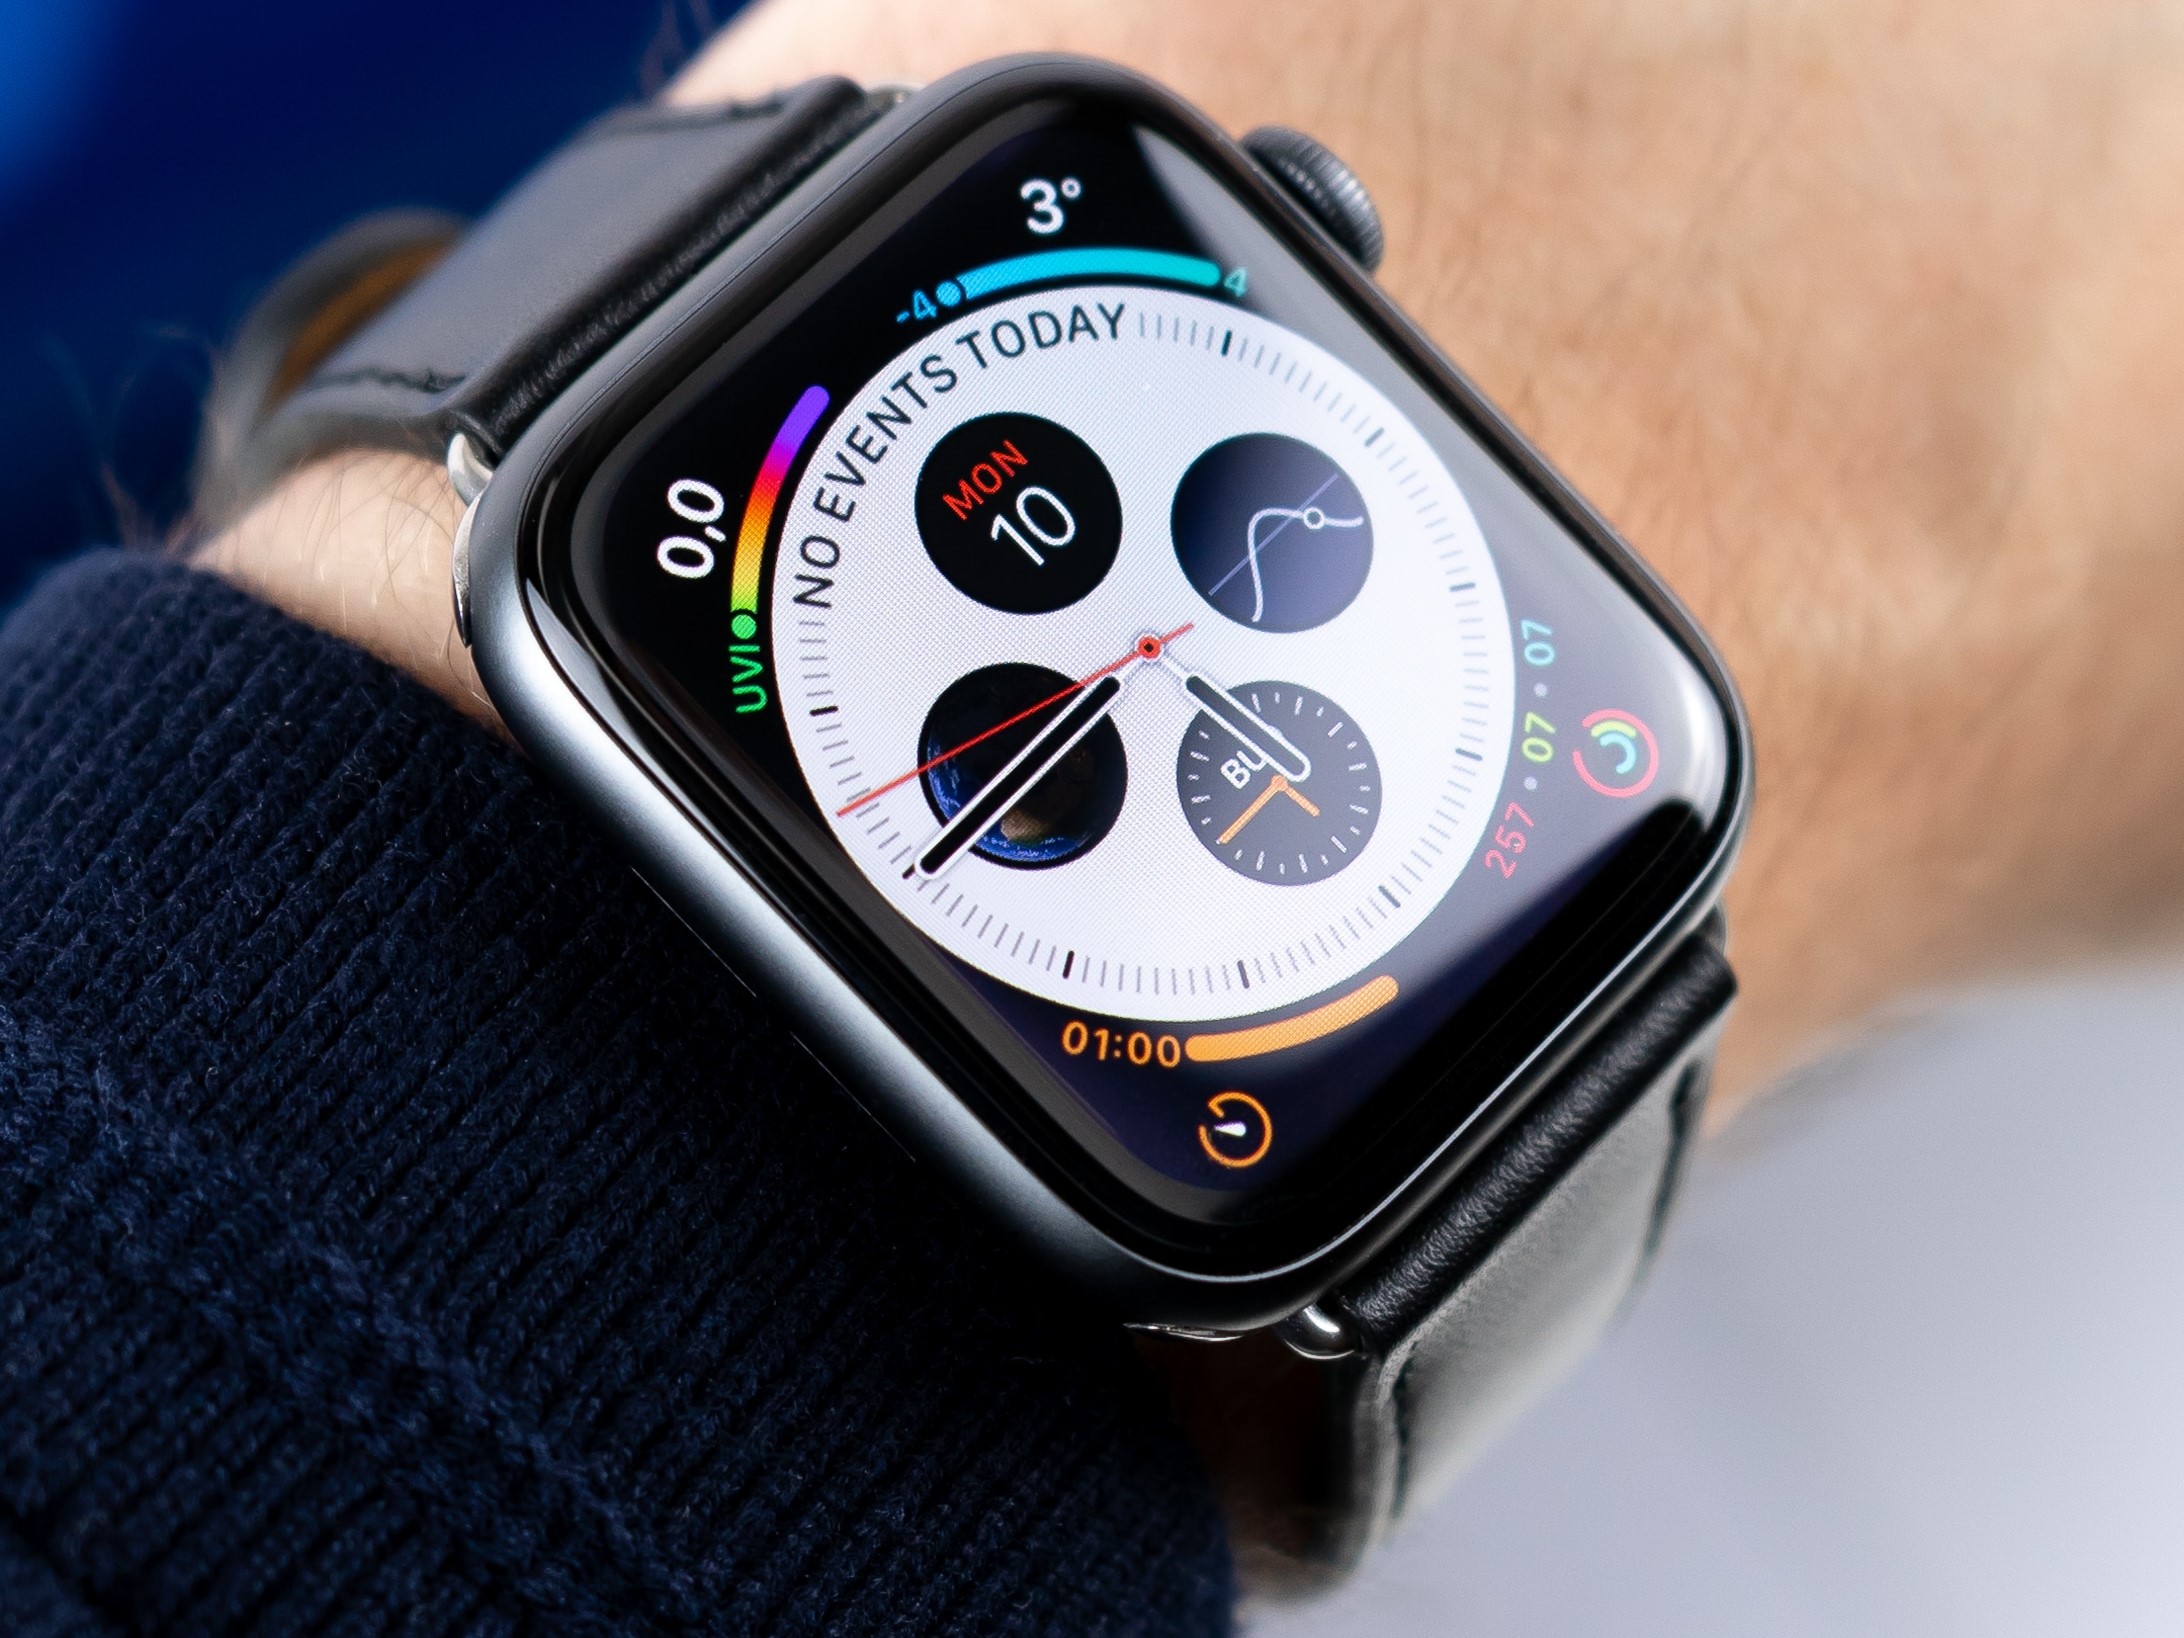 Apple Watch redesign and new health-tracking features confirmed